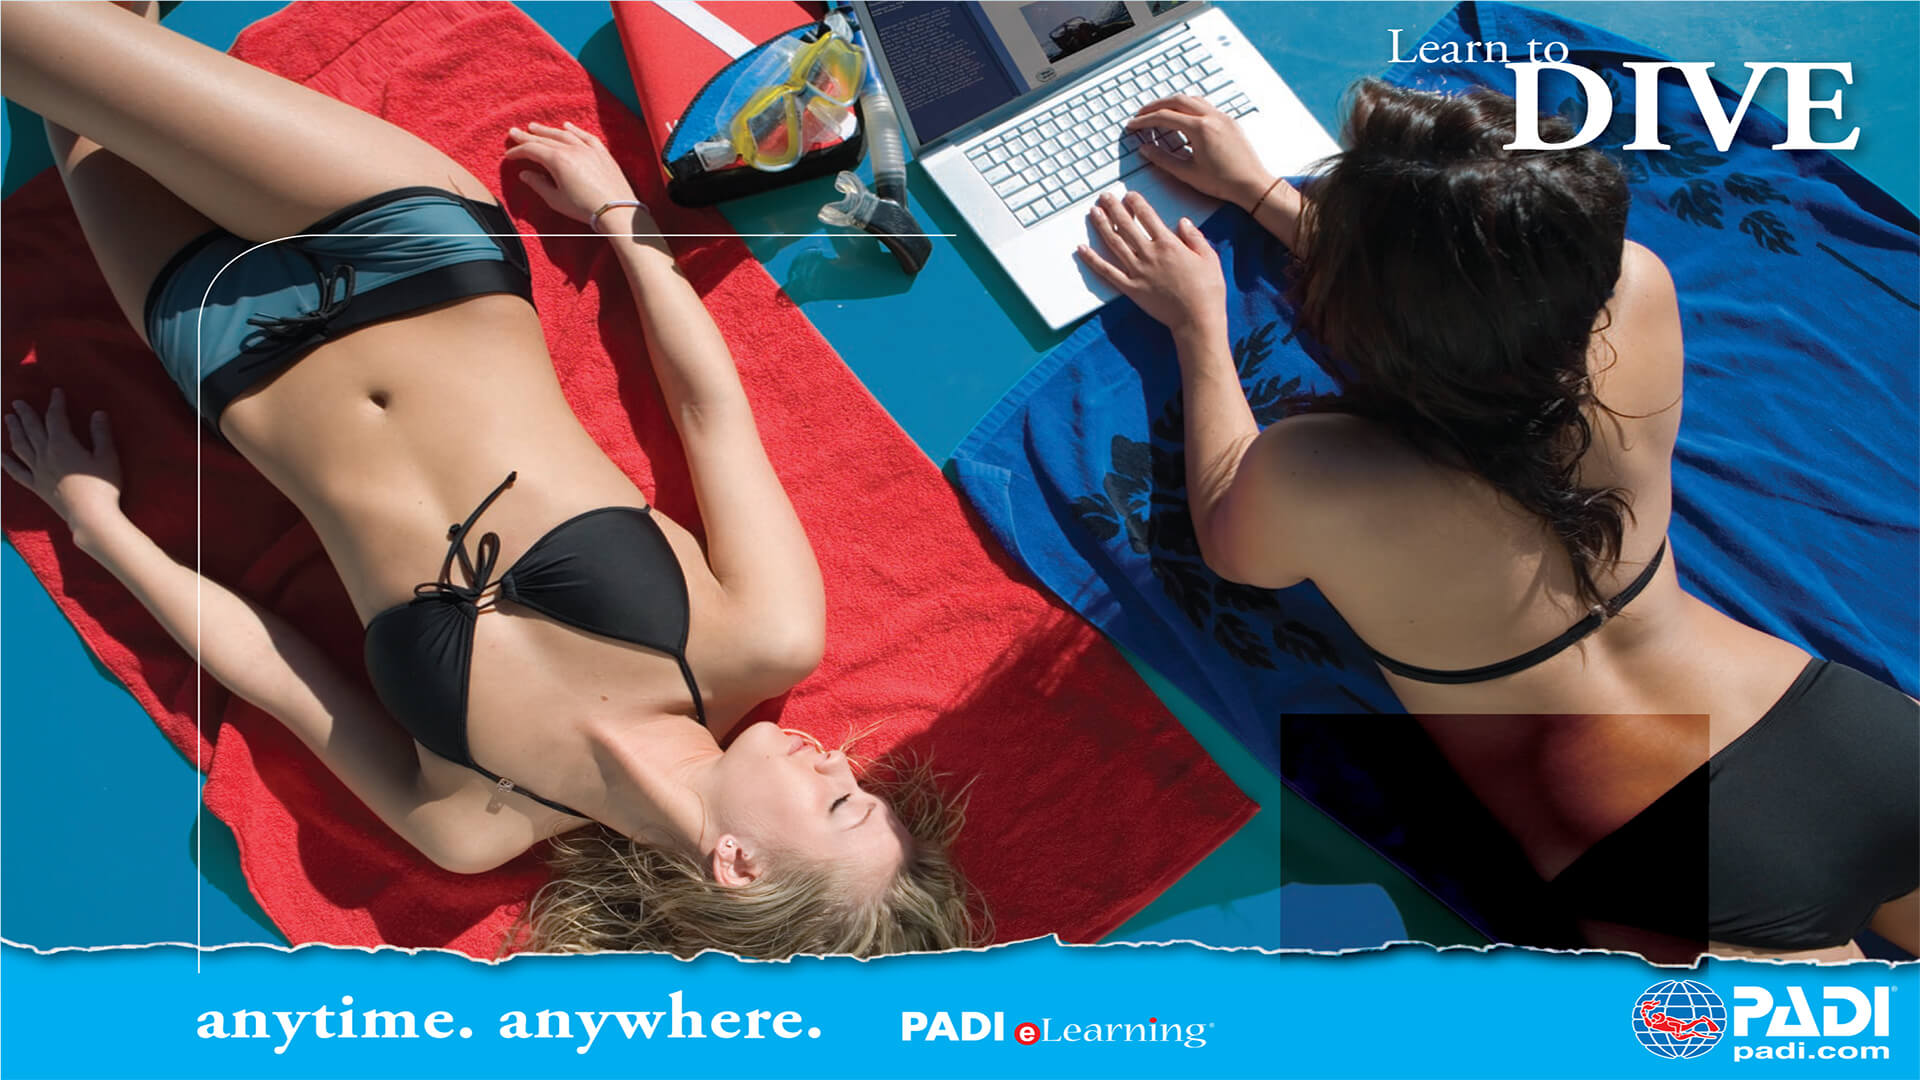 What Is PADI elearning ?